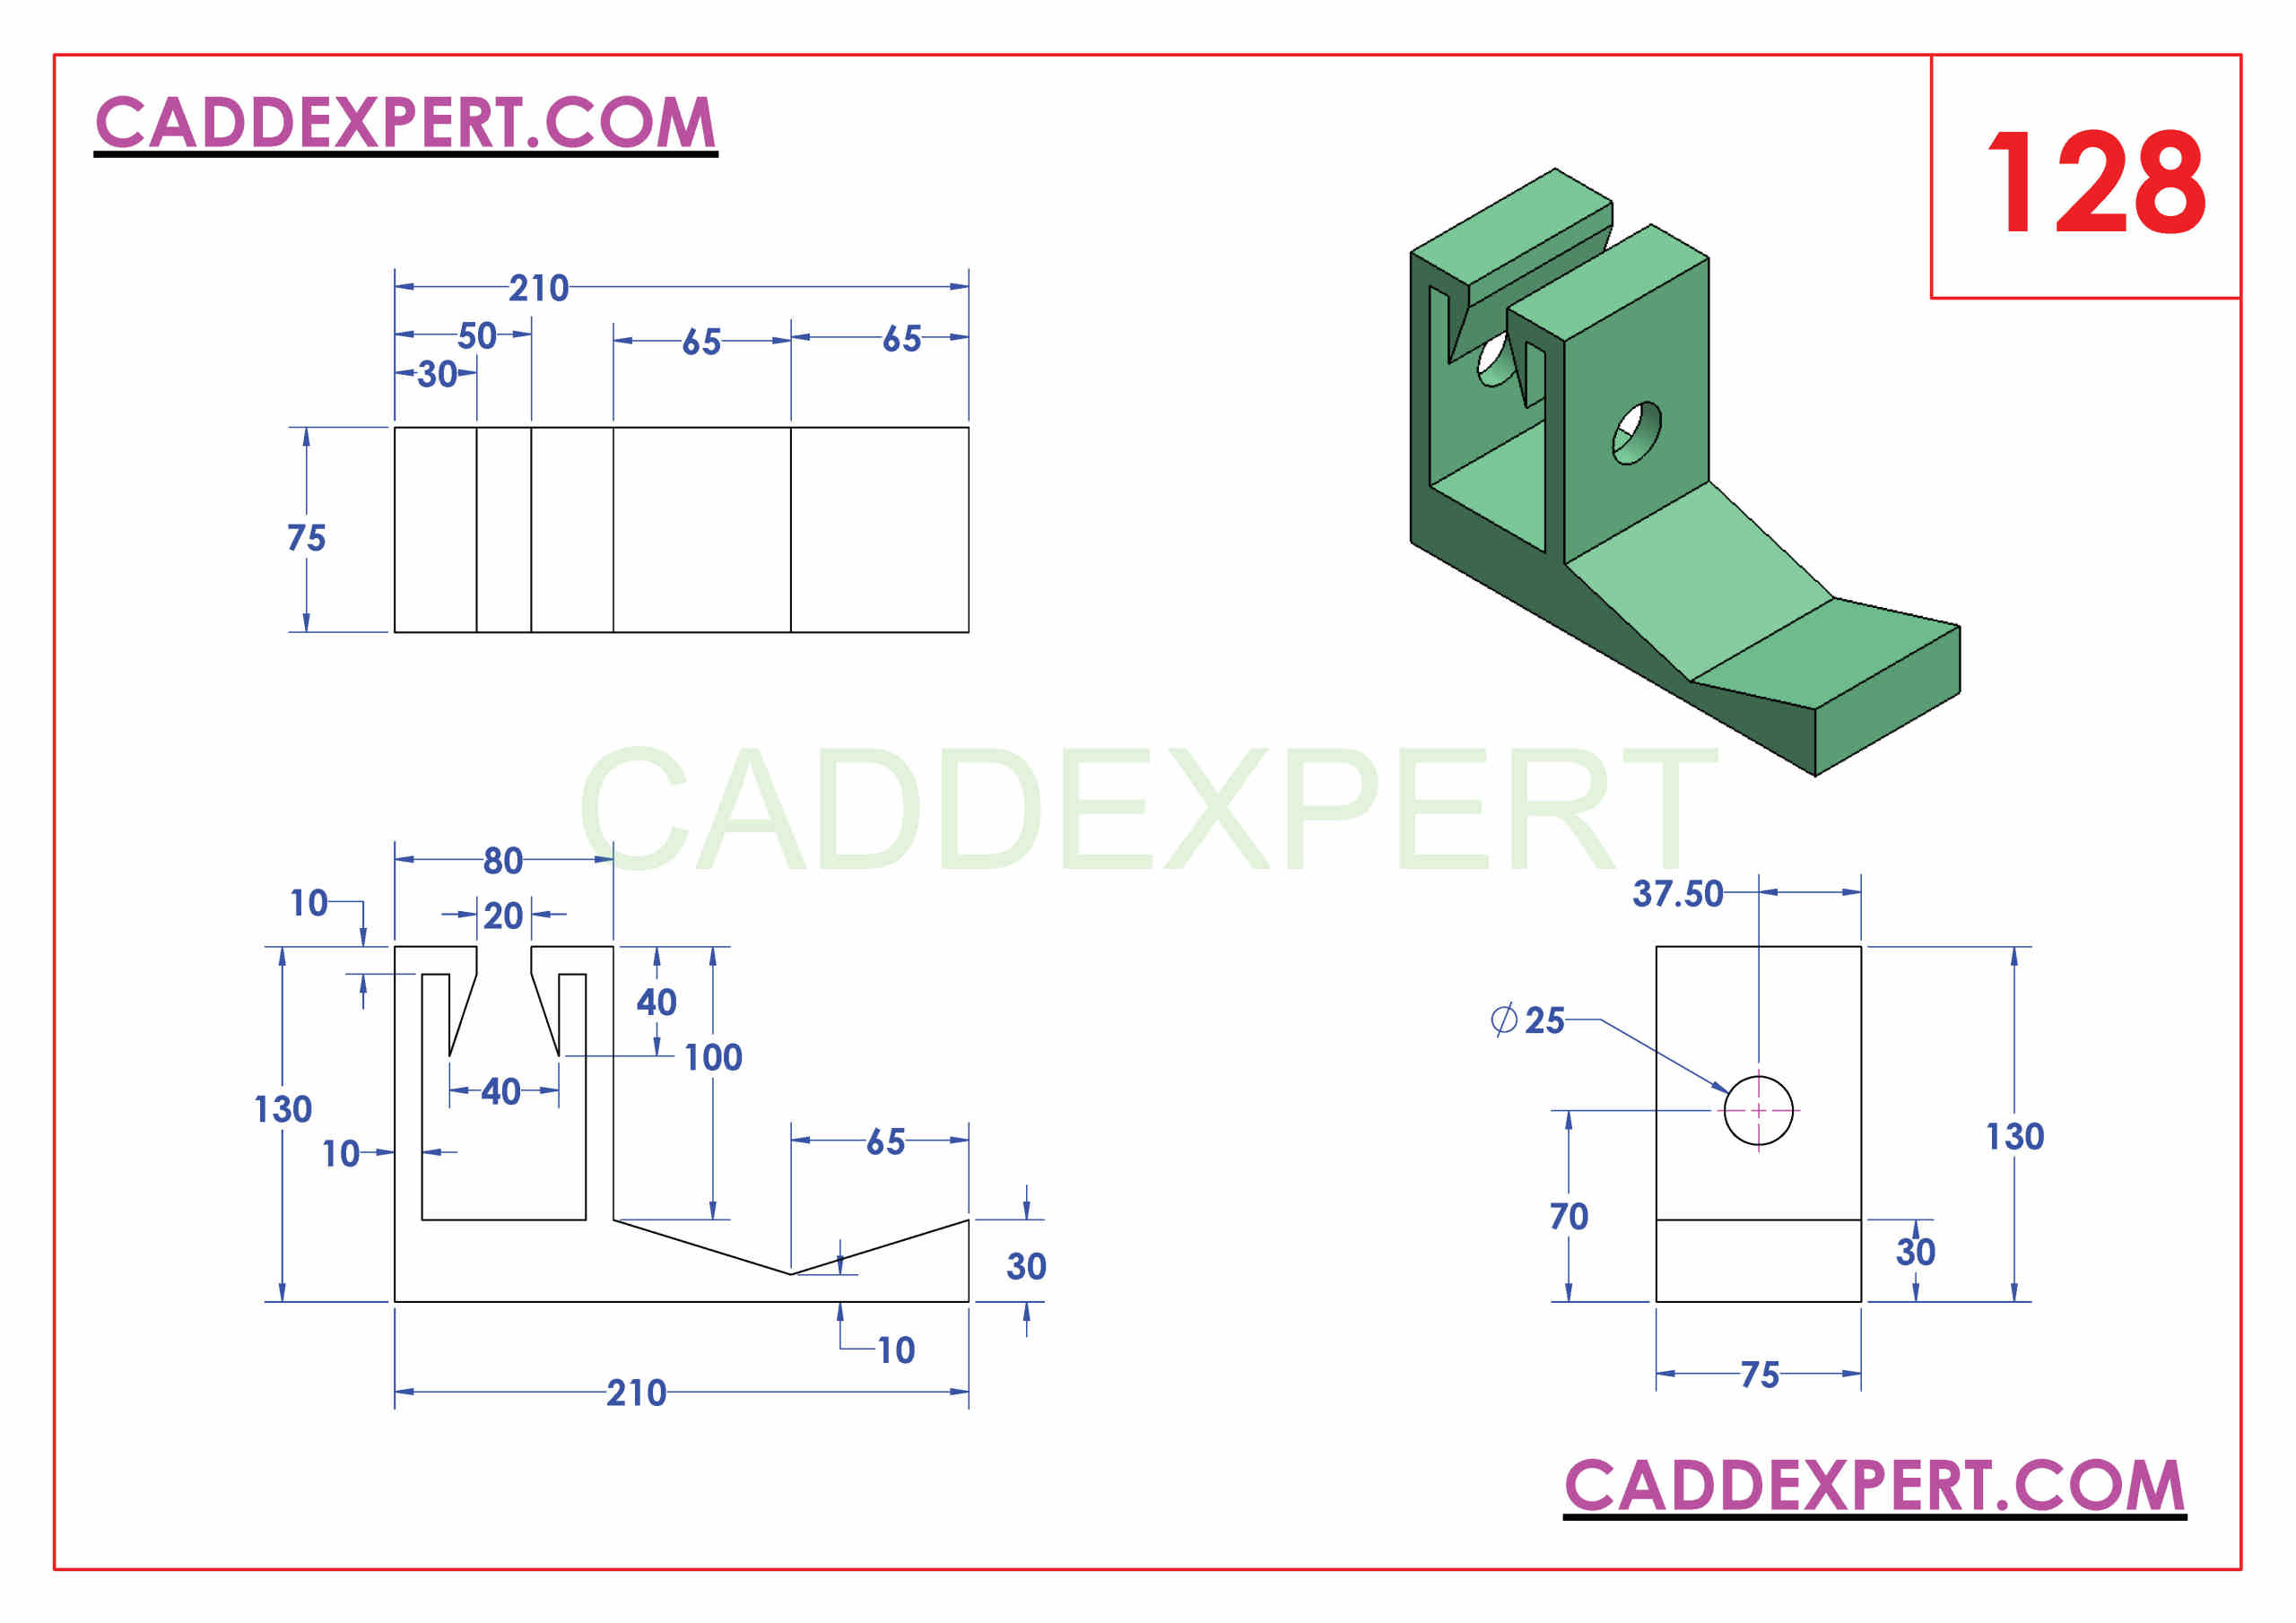 50 solidworks exercises pdf free download